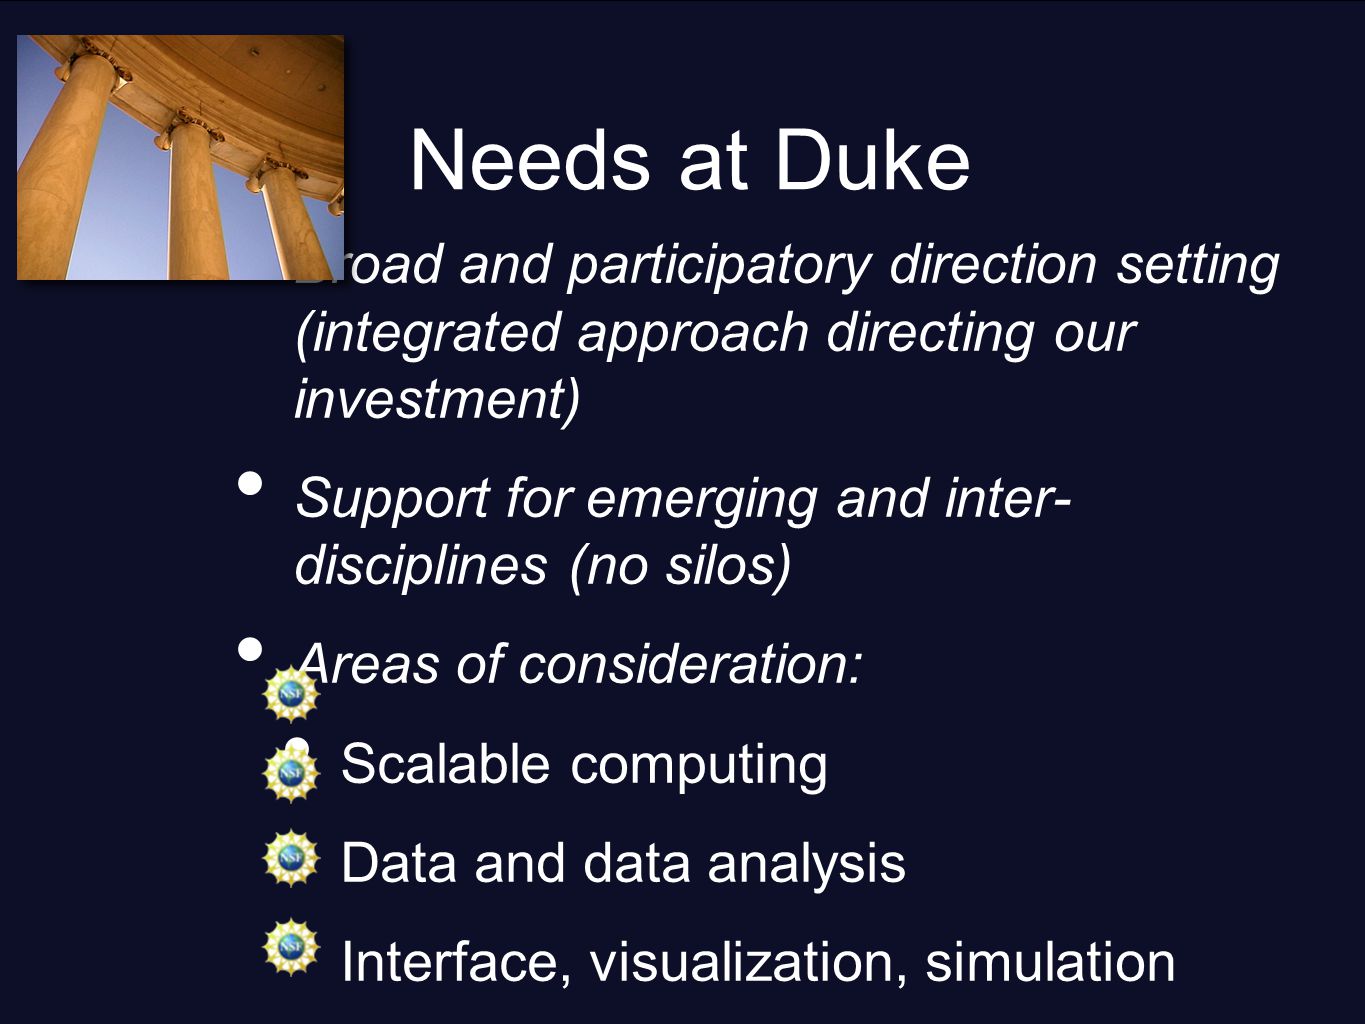 Needs at Duke Broad and participatory direction setting (integrated approach directing our investment) Support for emerging and inter- disciplines (no silos) Areas of consideration: Scalable computing Data and data analysis Interface, visualization, simulation Collaboration services